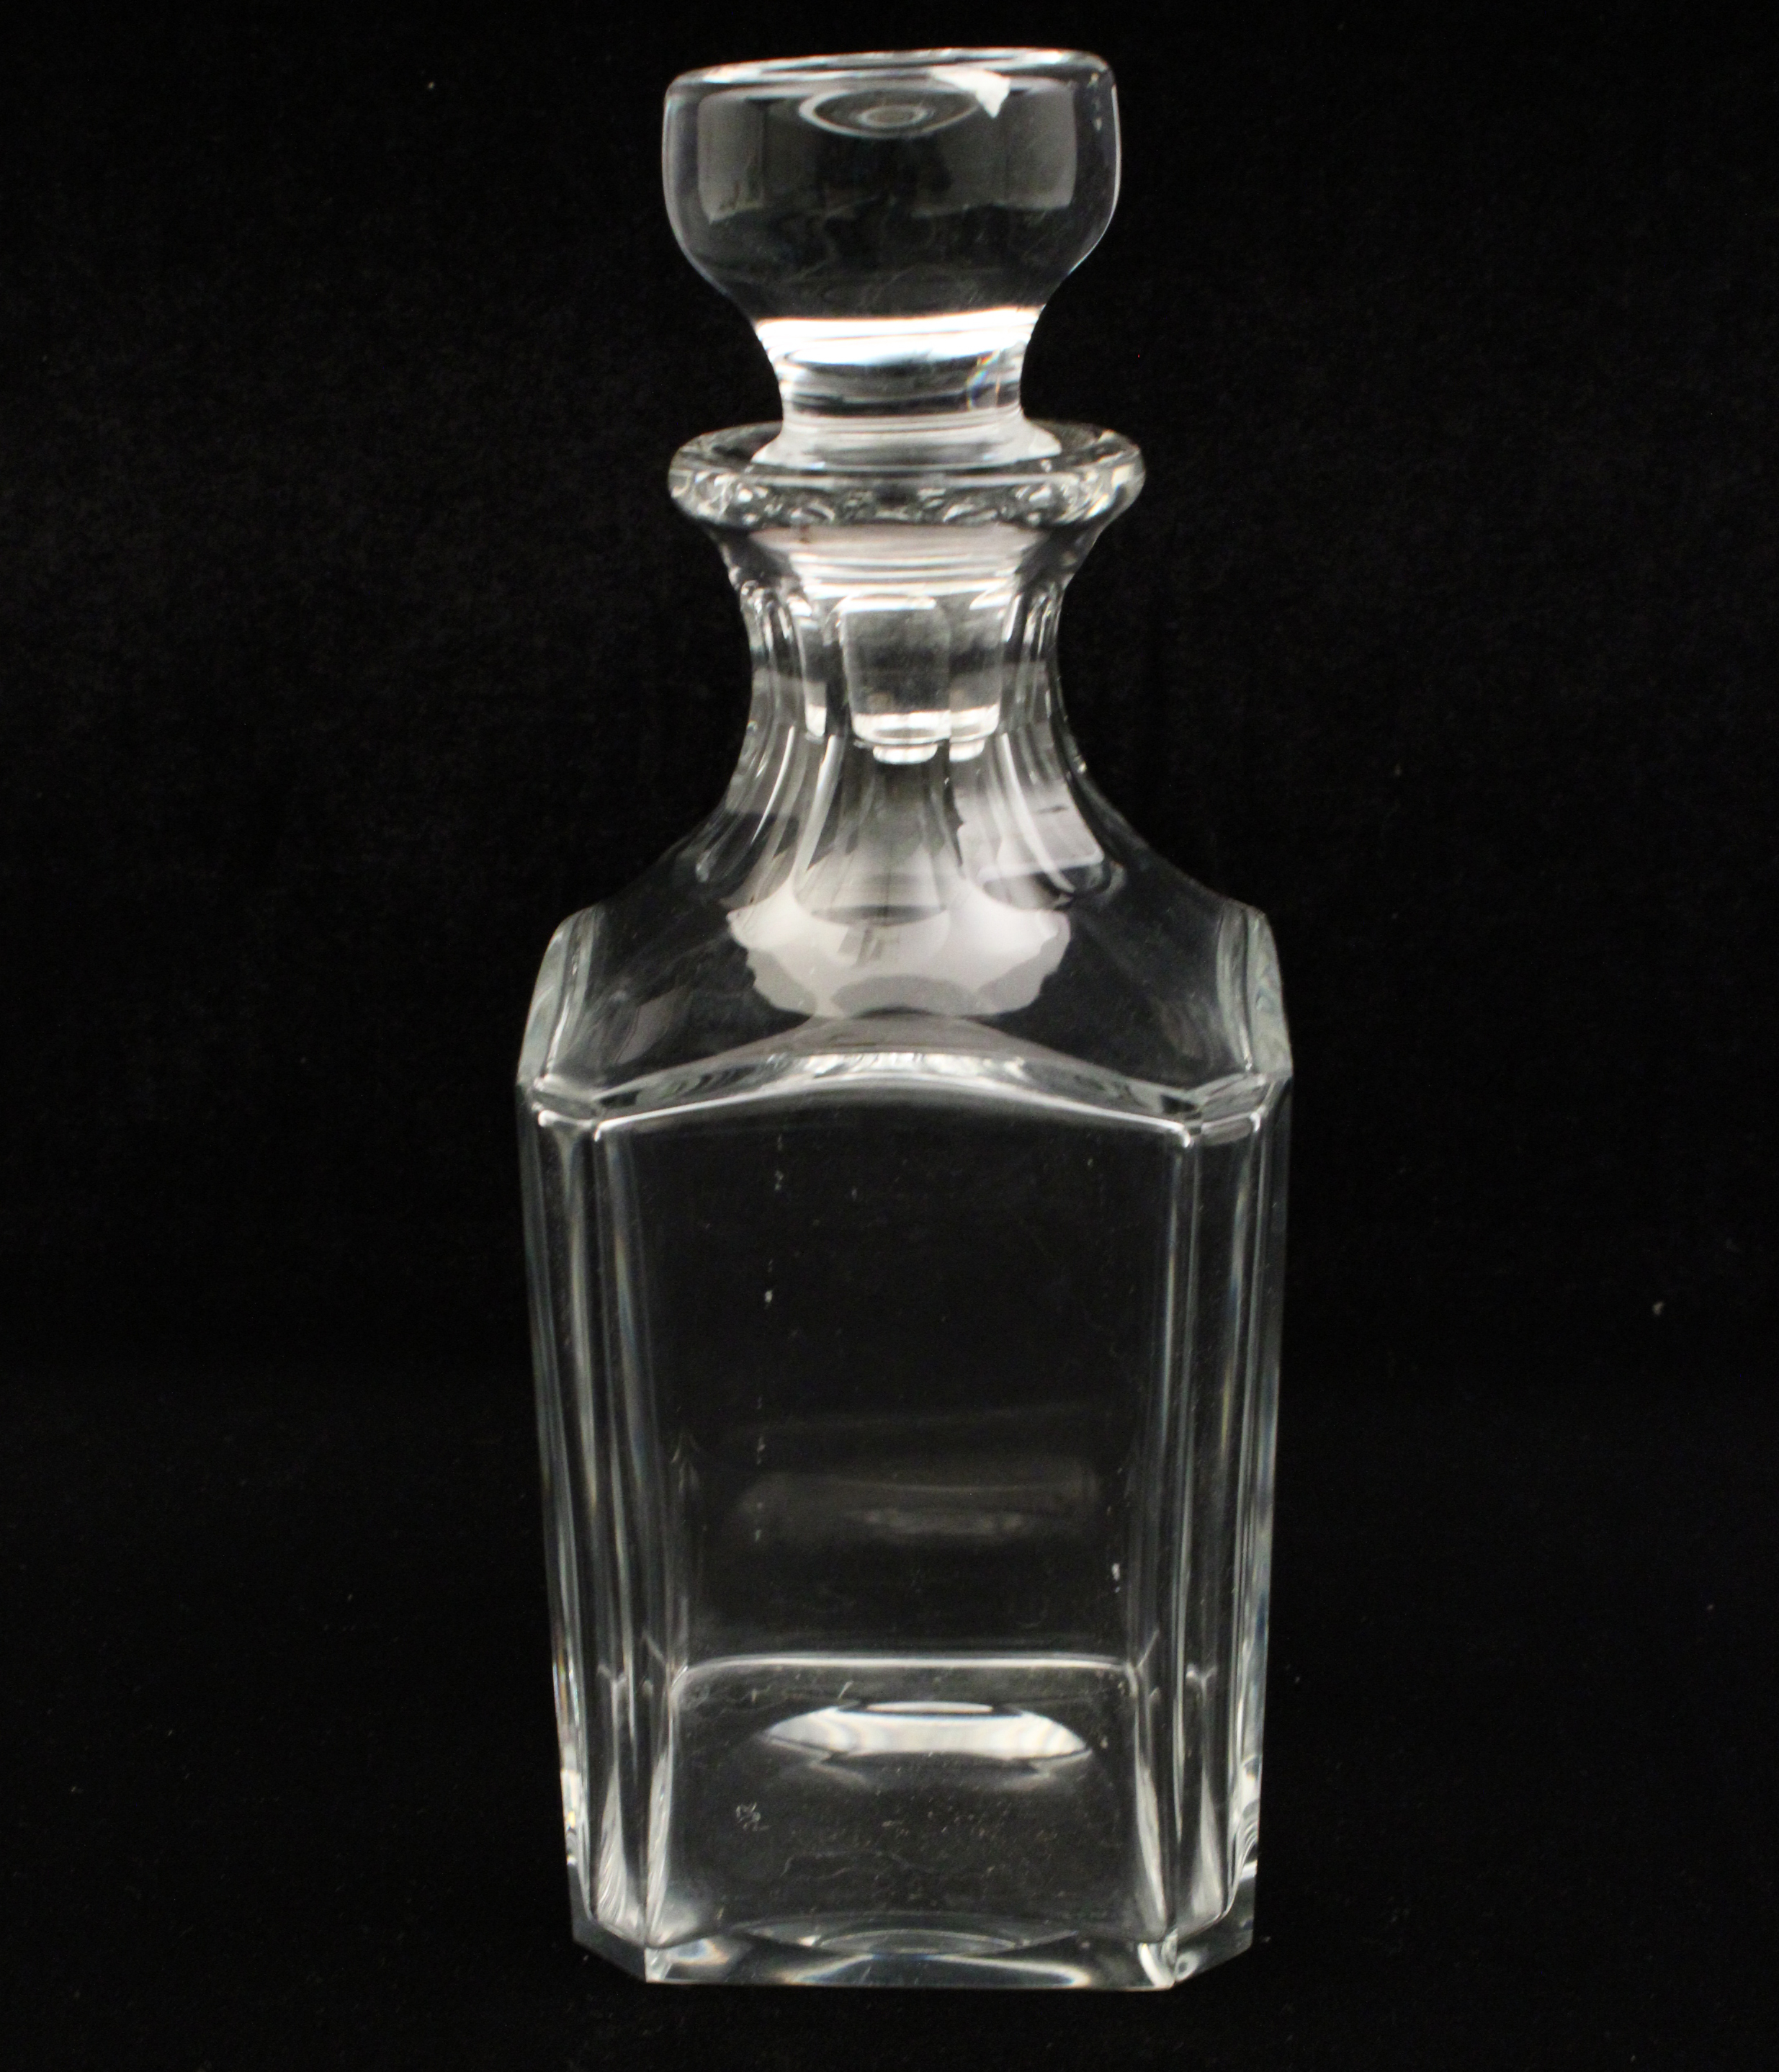 BACCARAT CRYSTAL DECANTER BACCARAT 35f29e